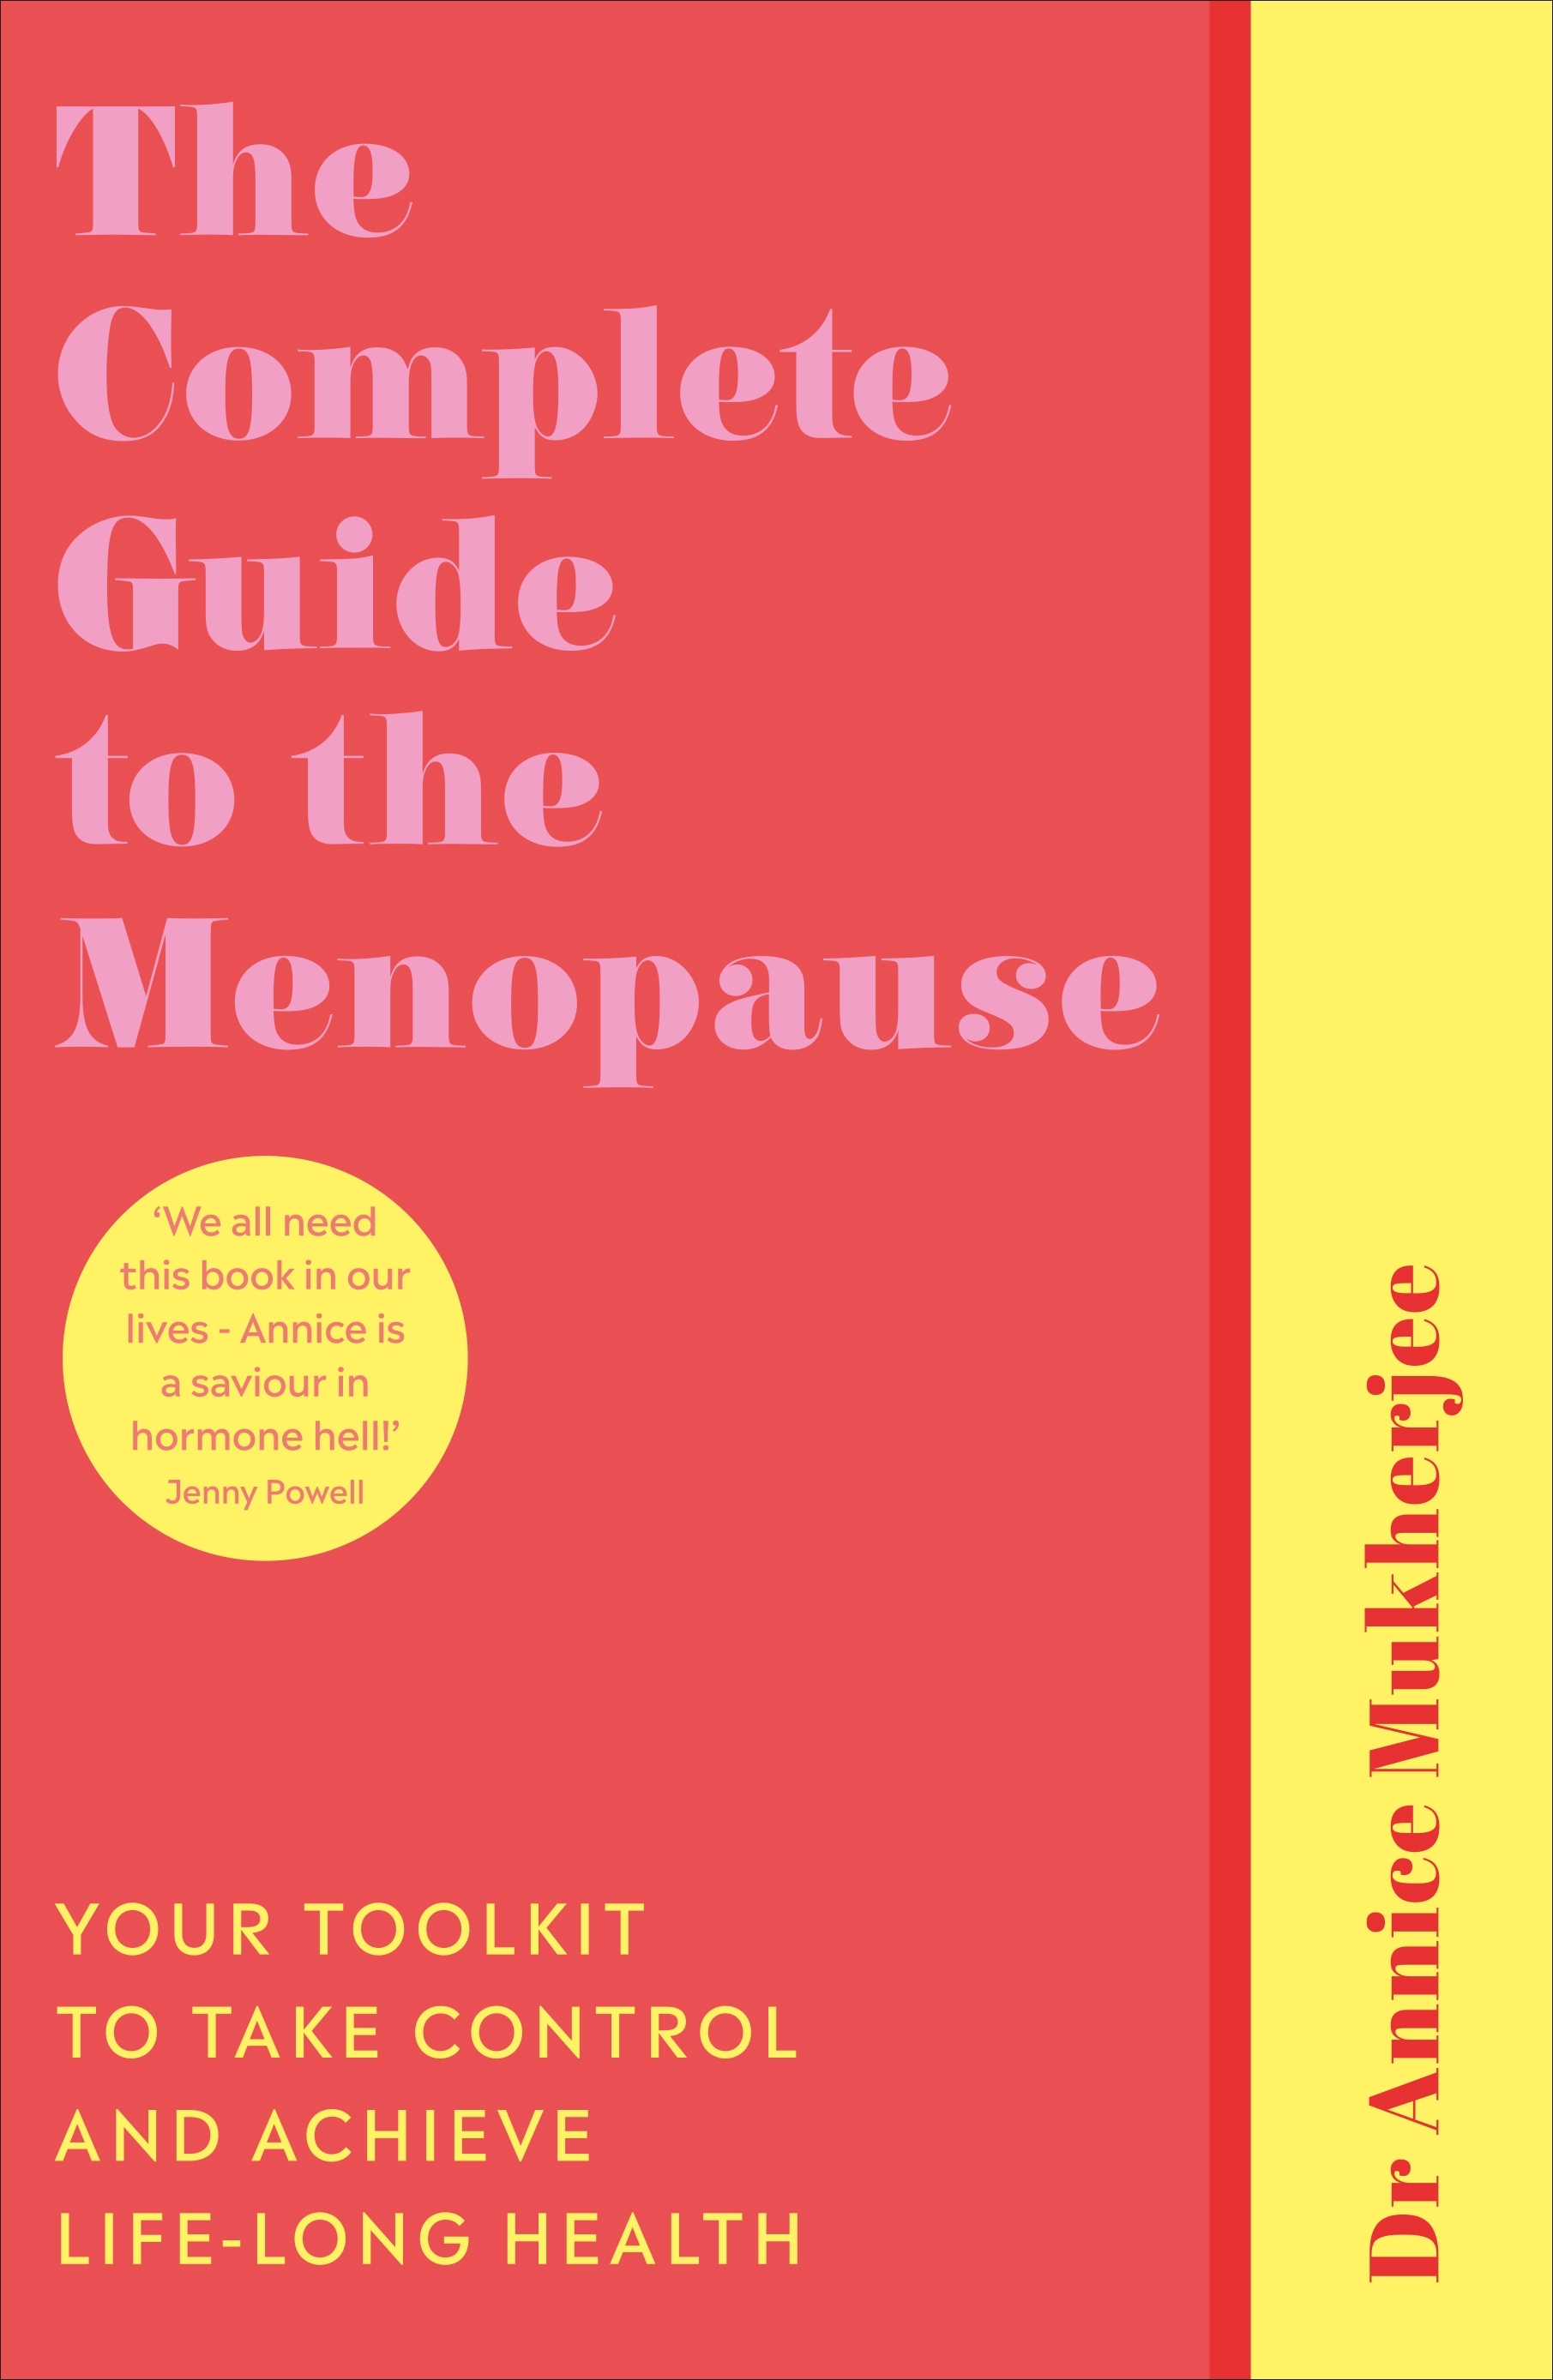 The Complete Guide To The Menopause By Annice Mukherjee Penguin Books New Zealand 9212